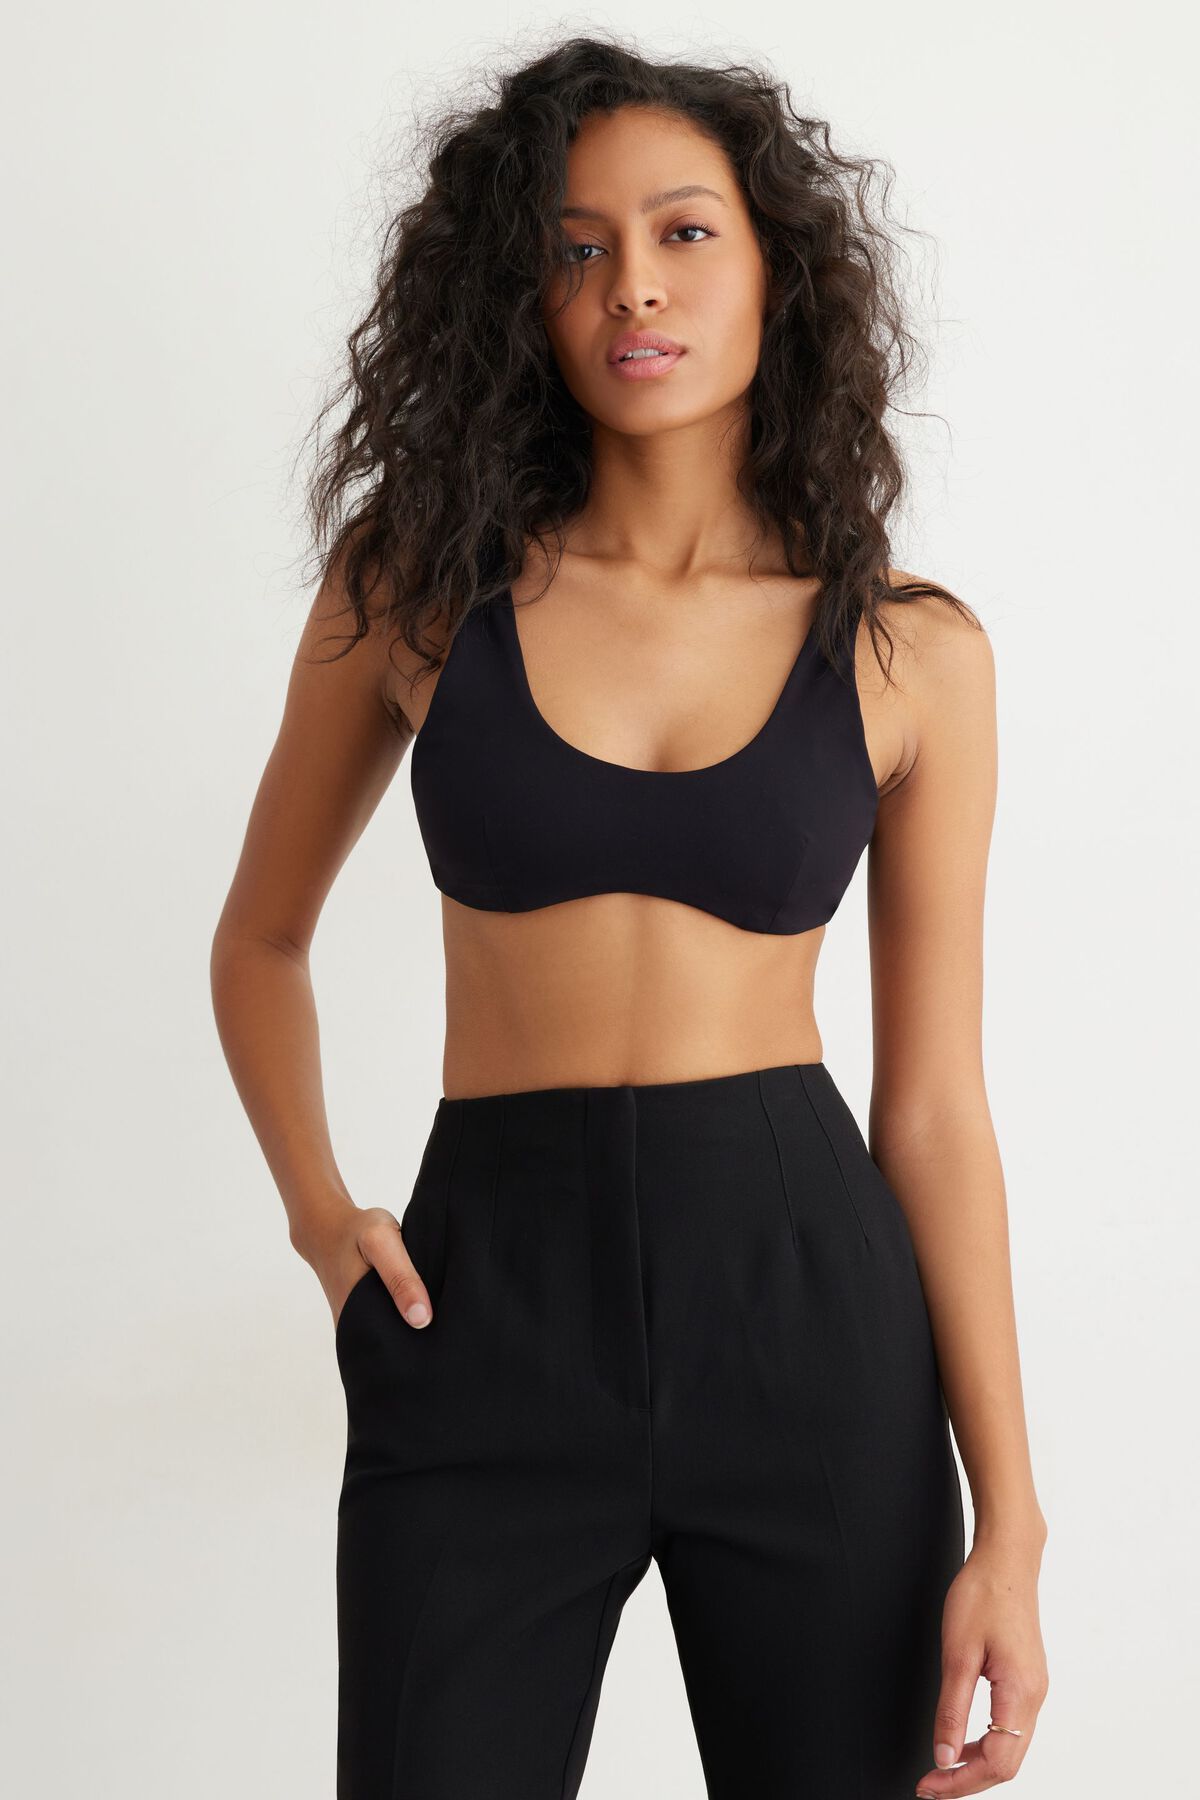 Leia Cotton Rope Bra Top In Black by Brunna.Co